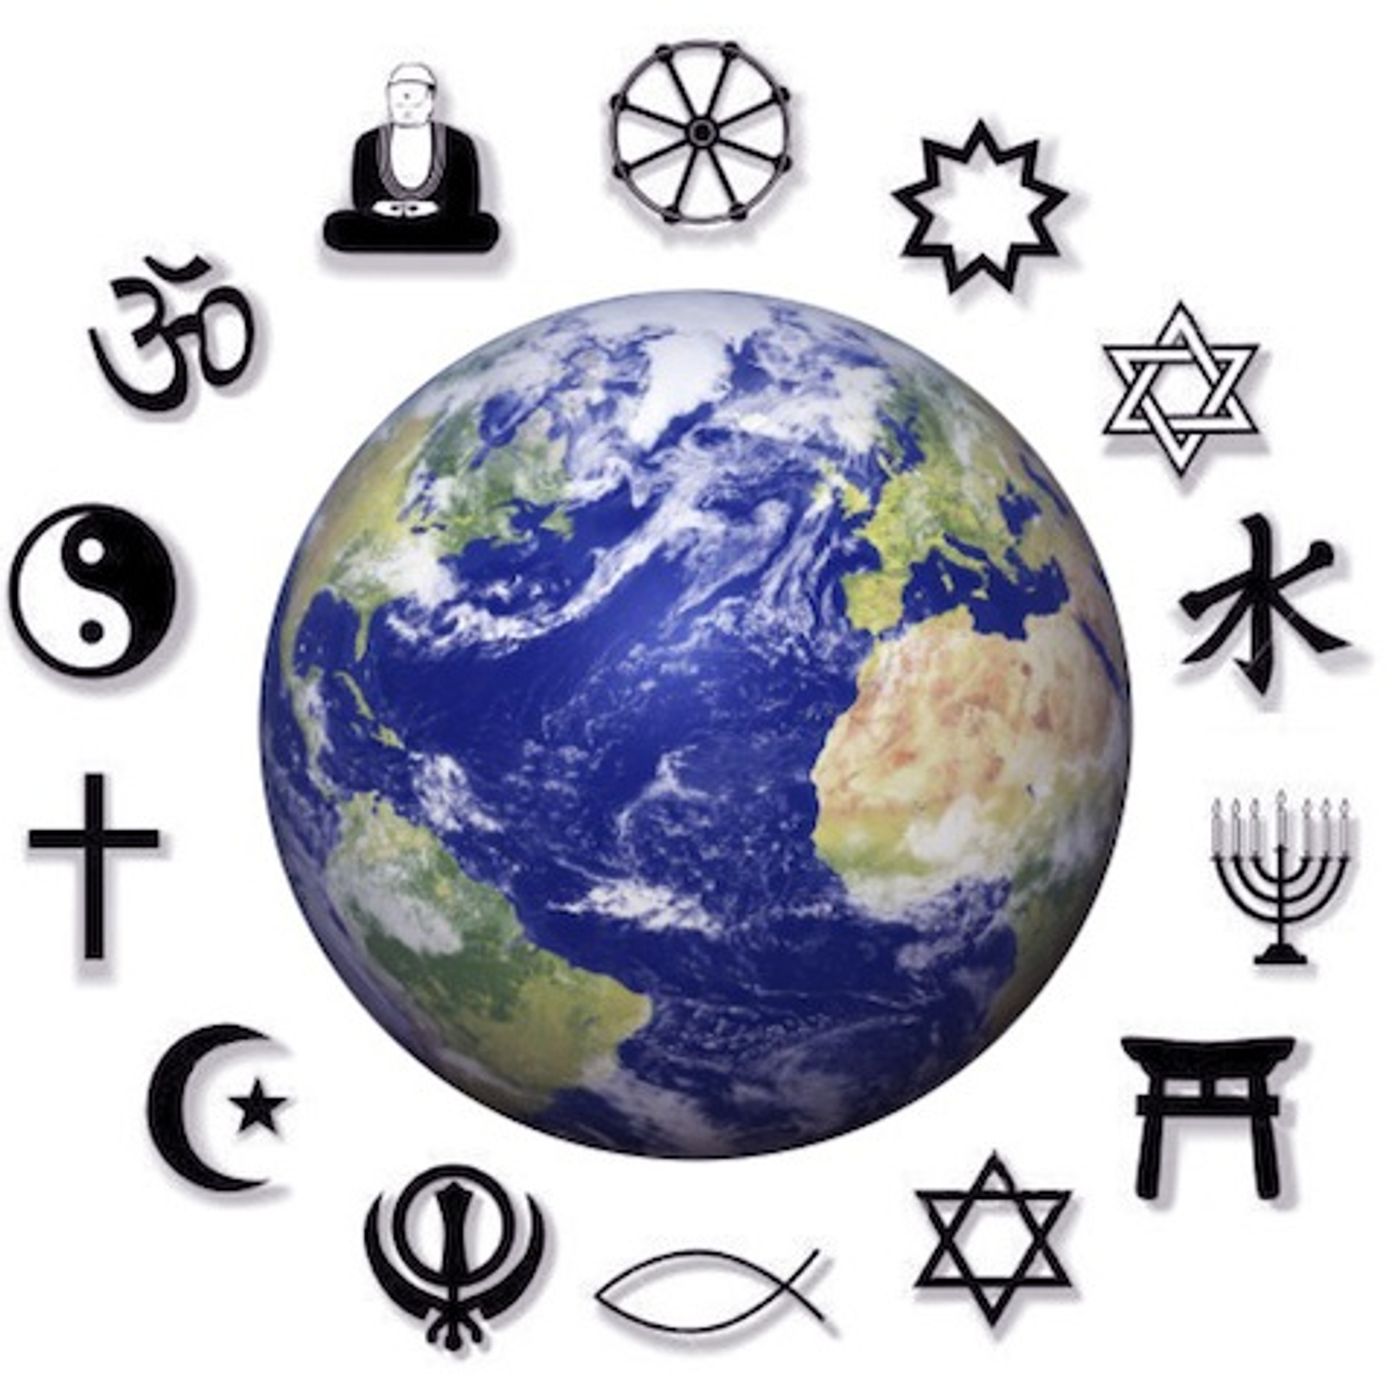 Are all religions the same?